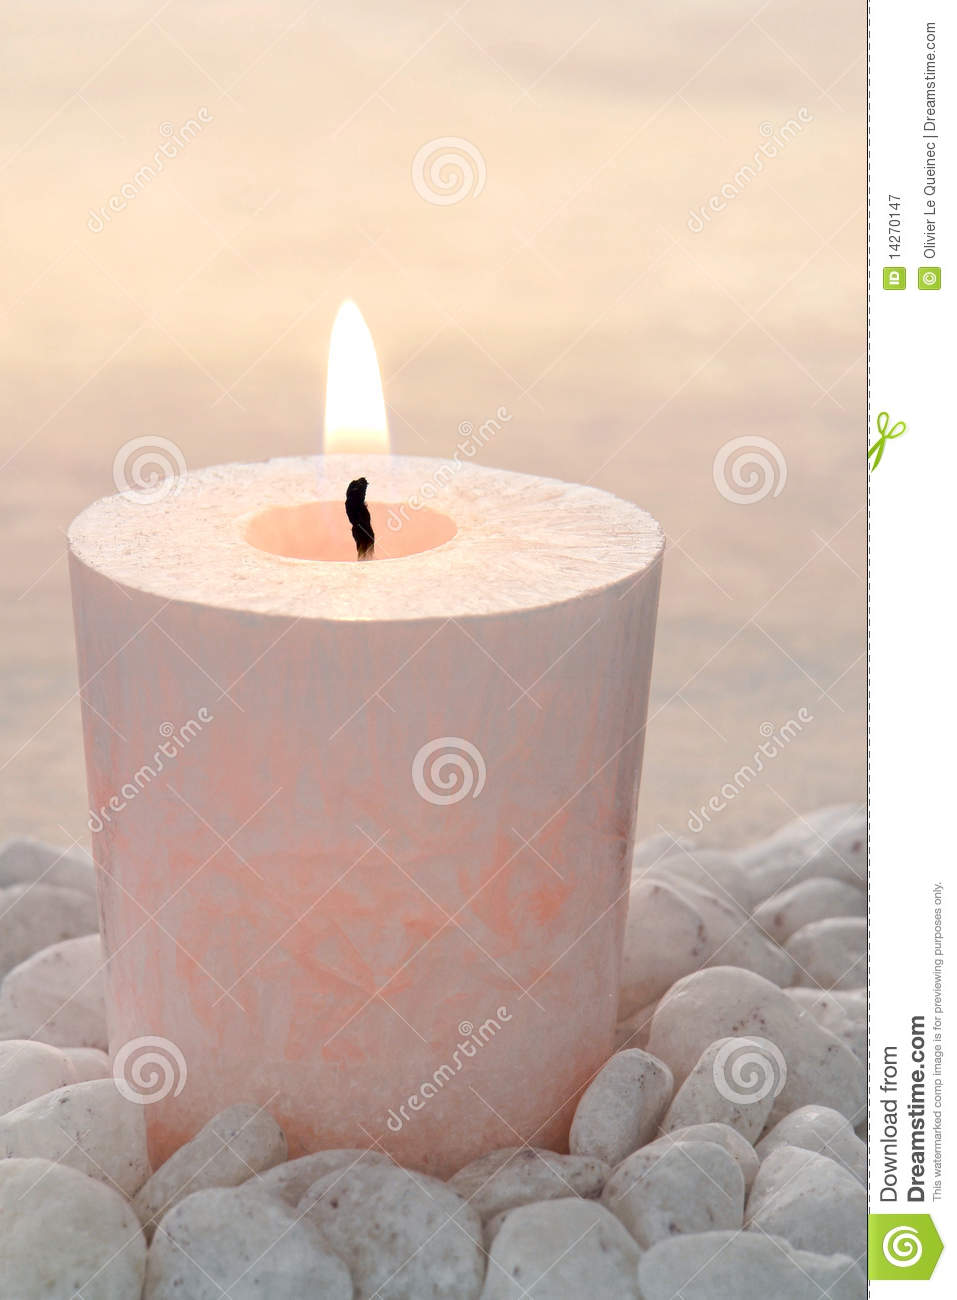 Memorial Candle Softly Glowing And Burning On A Bed Of White Pebbles